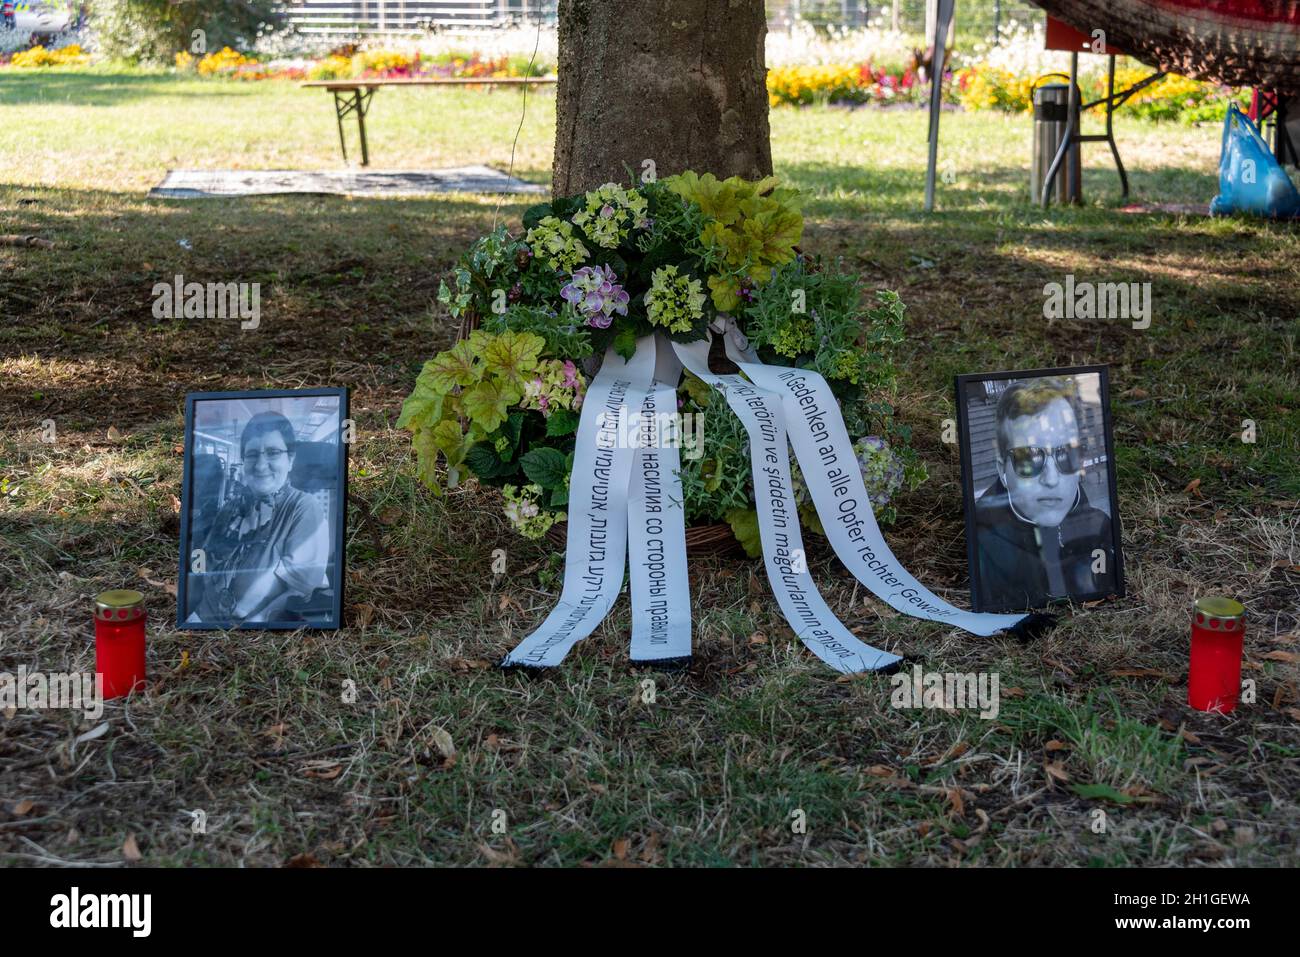 Germany, Saxony-Anhalt, Magdeburg, 22 July 2020: A wreath has been laid before the Regional Court in memory of the victims of the right-wing extremist Stock Photo